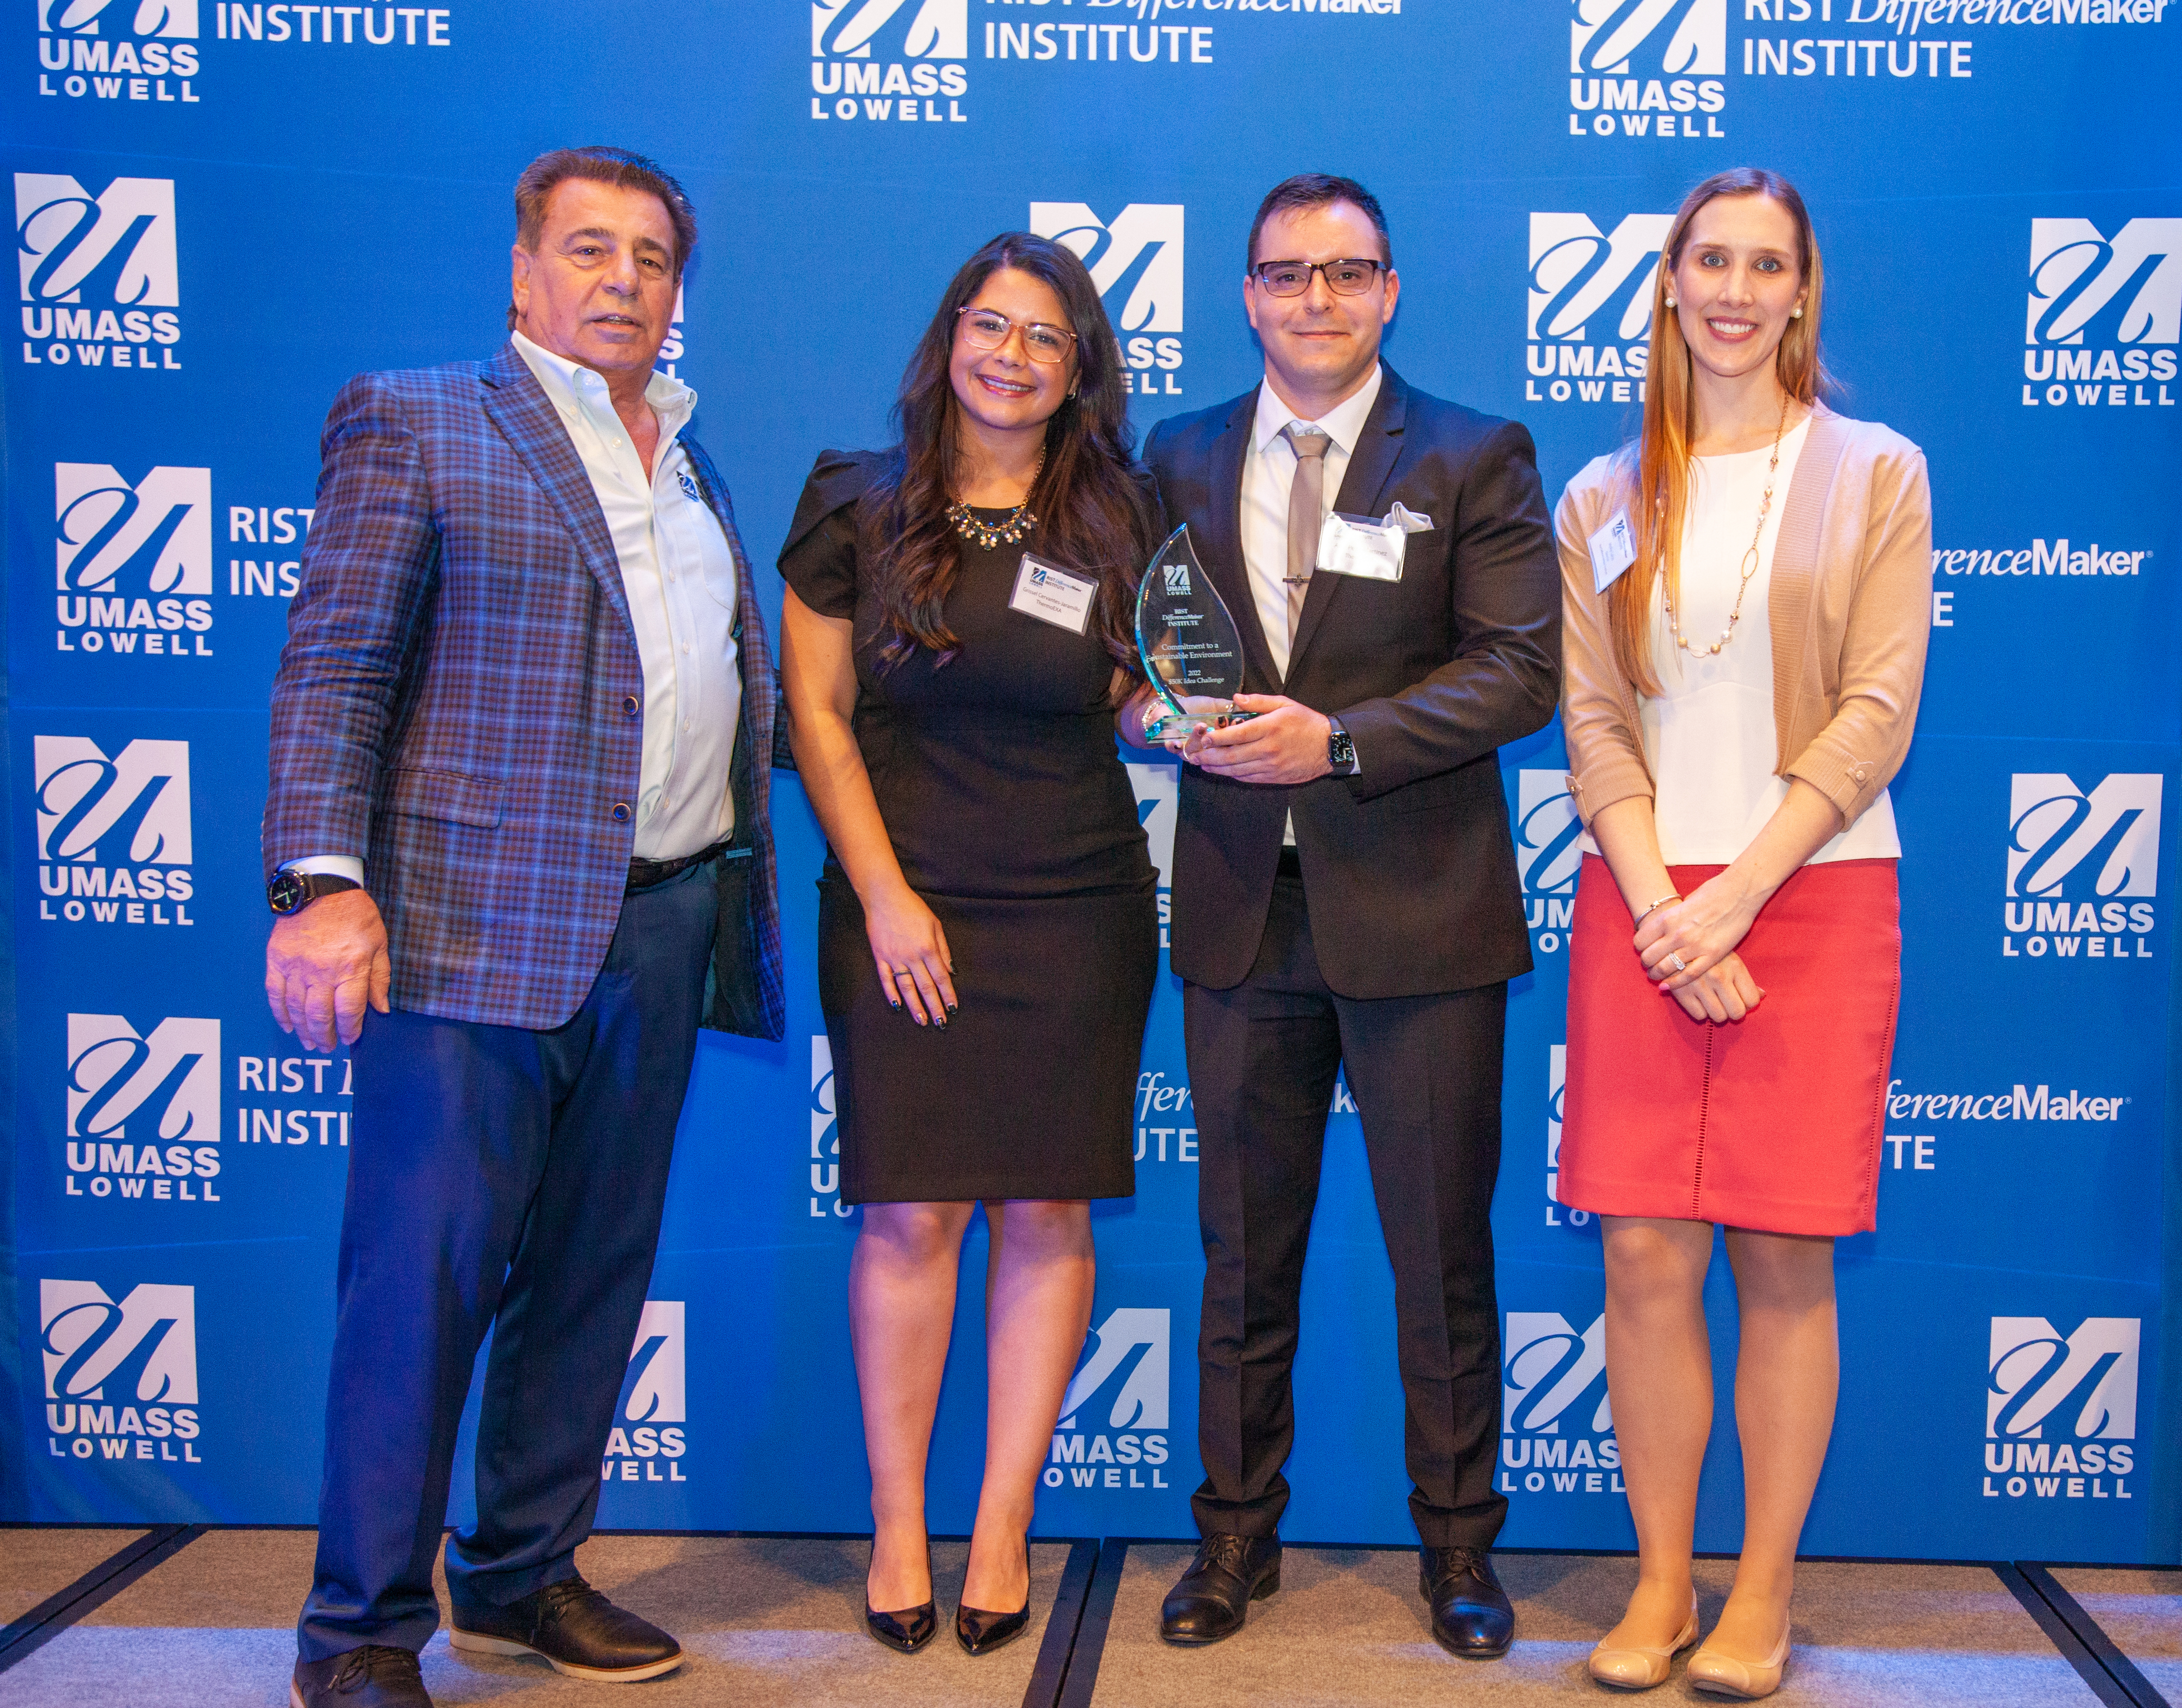 Ariel Pena-Martinez, computer engineering graduate student, and Grissel Cervantes-Jaramillo from the ThermoEXA team holding an award pose with Brian Rist and Holly Lalos of Difference Makers against a blue UMass Lowell backdrop.